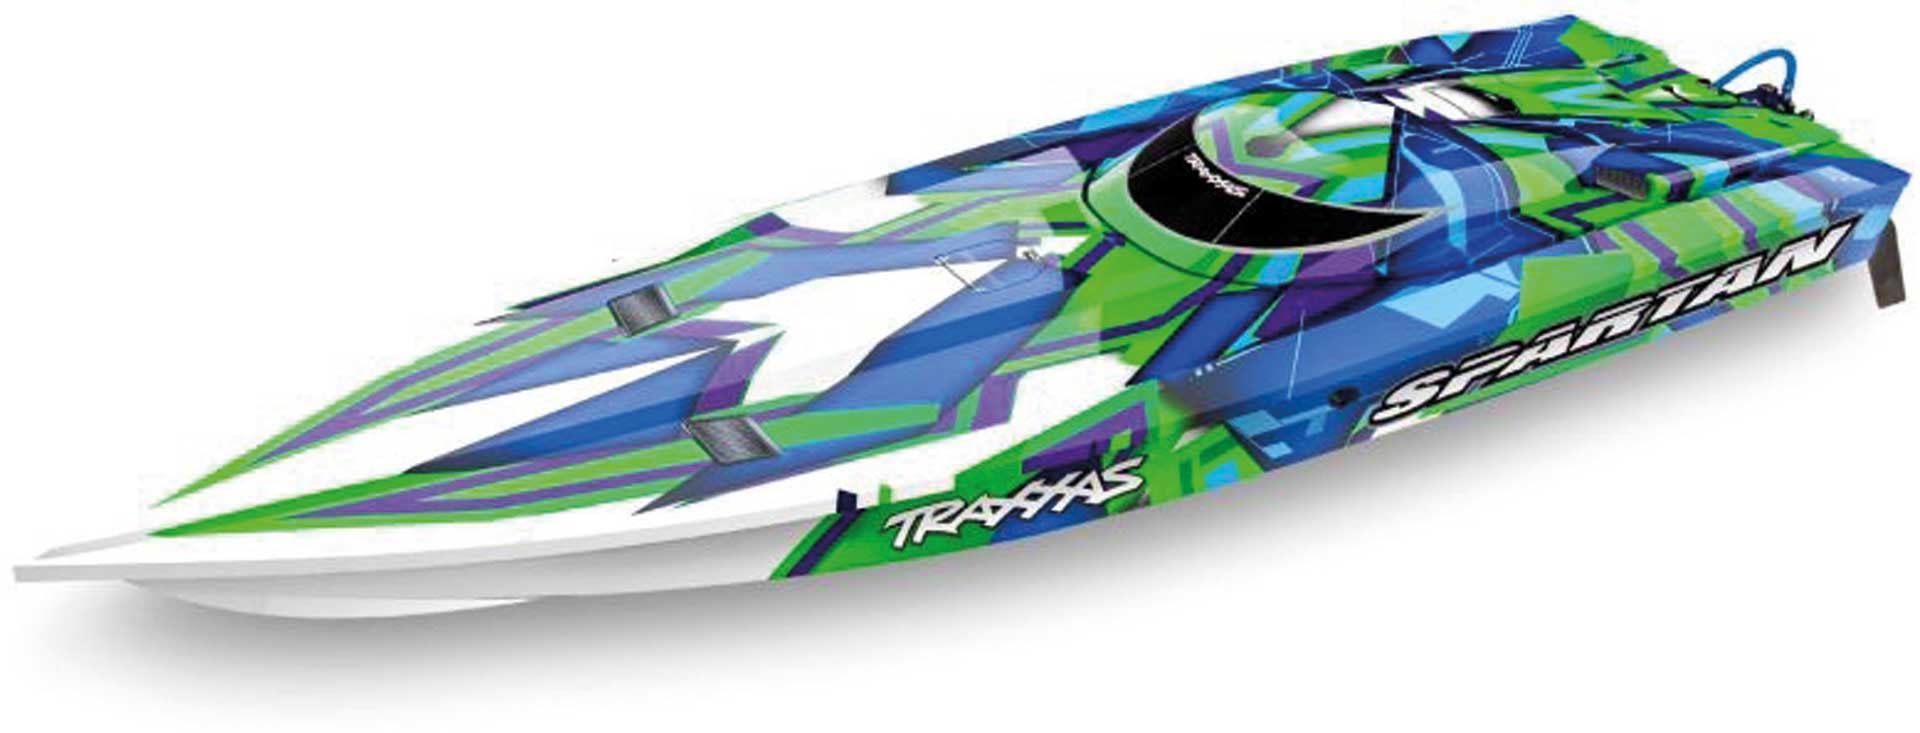 TRAXXAS SPARTAN GREEN WITHOUT BATTERY/CHARGER BL RACING BOAT BRUSHLESS